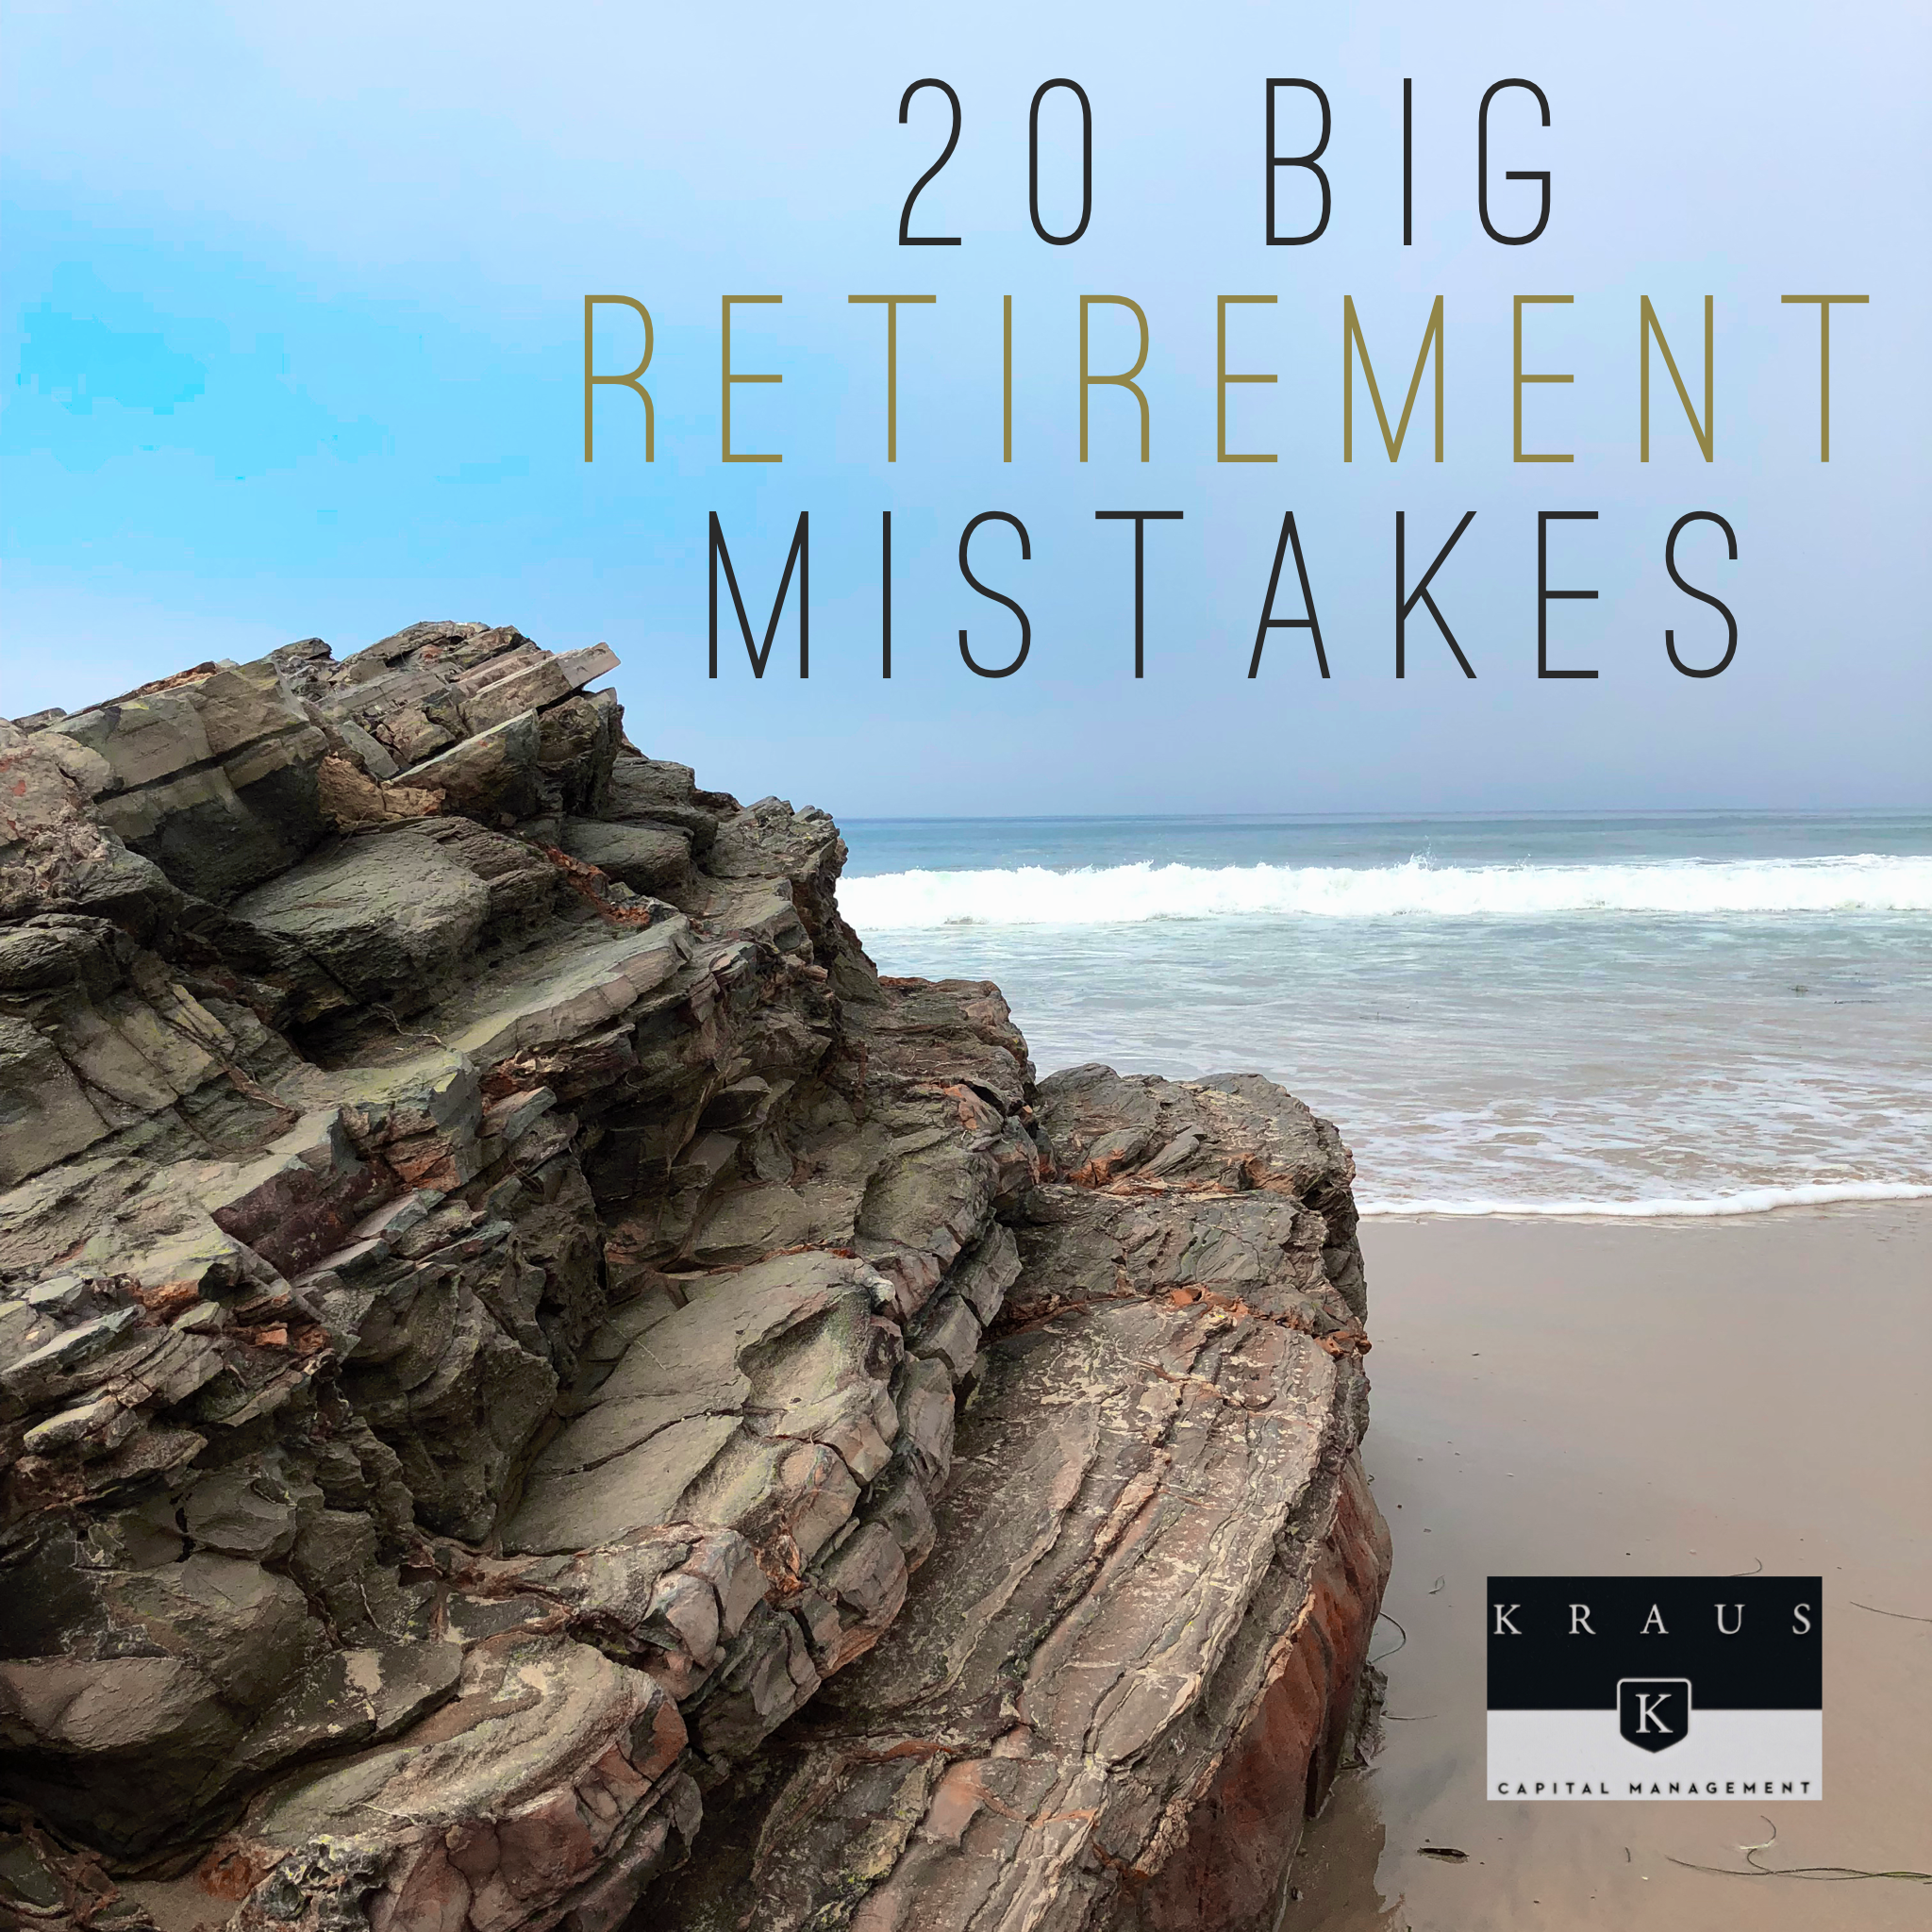 20 Big Mistakes for Those Approaching Retirement